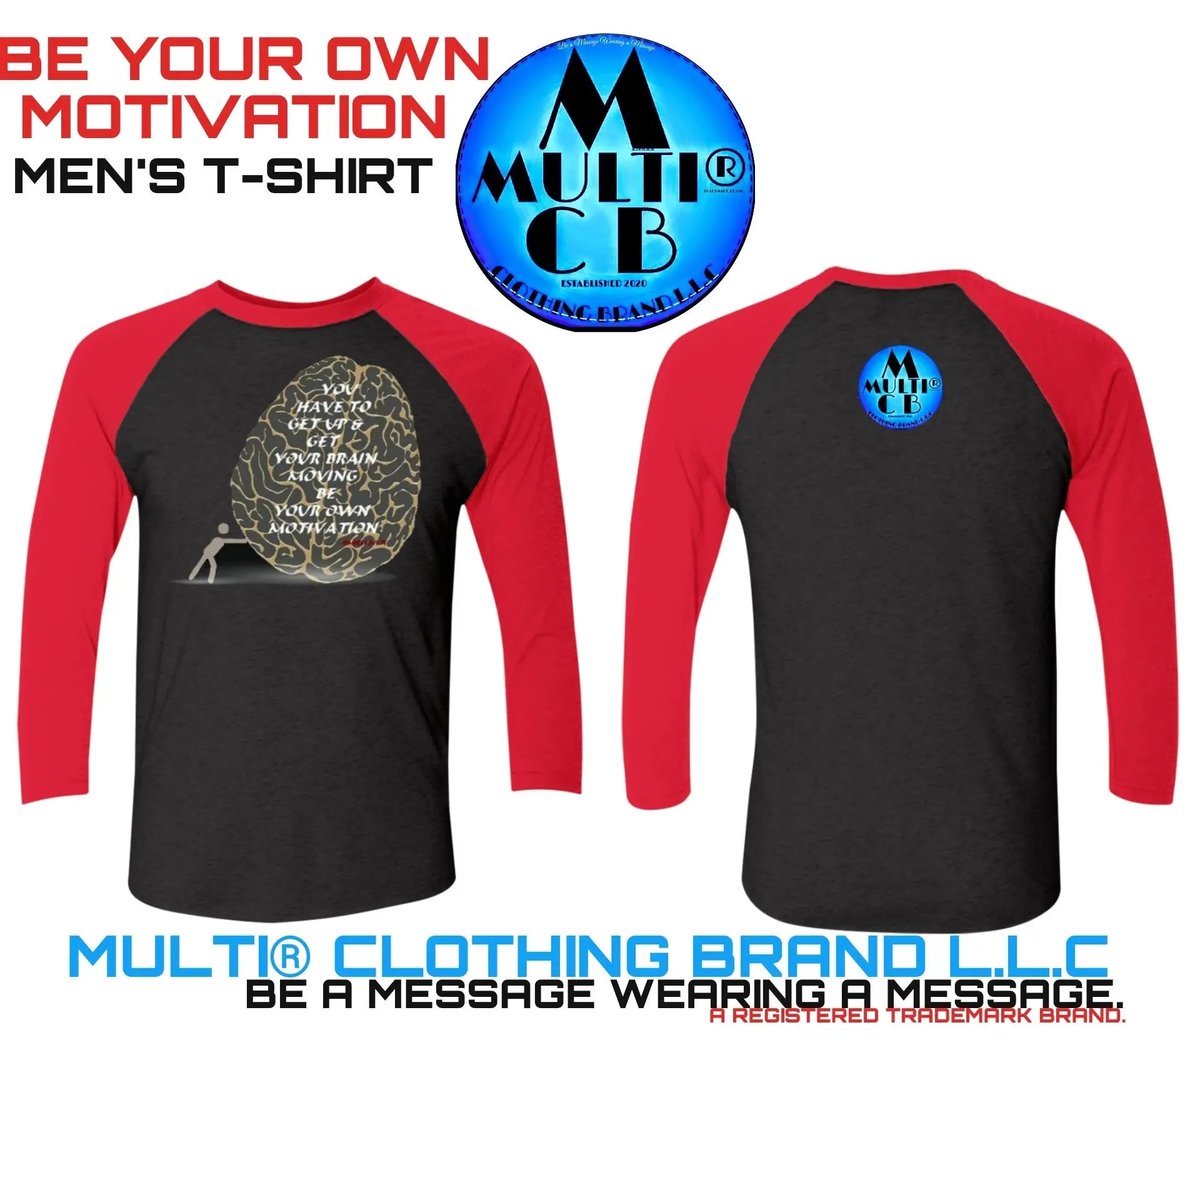 Be Your Own Motivation Men's – Multi Clothing Brand L L C®
multiclothingbrand.com/products/be-yo…
#clothingbrand #clothingline #clothingstore #clothingcompany #sustainable #affordable #premium #clothings #ethical #streetclothing #streetwear #multi